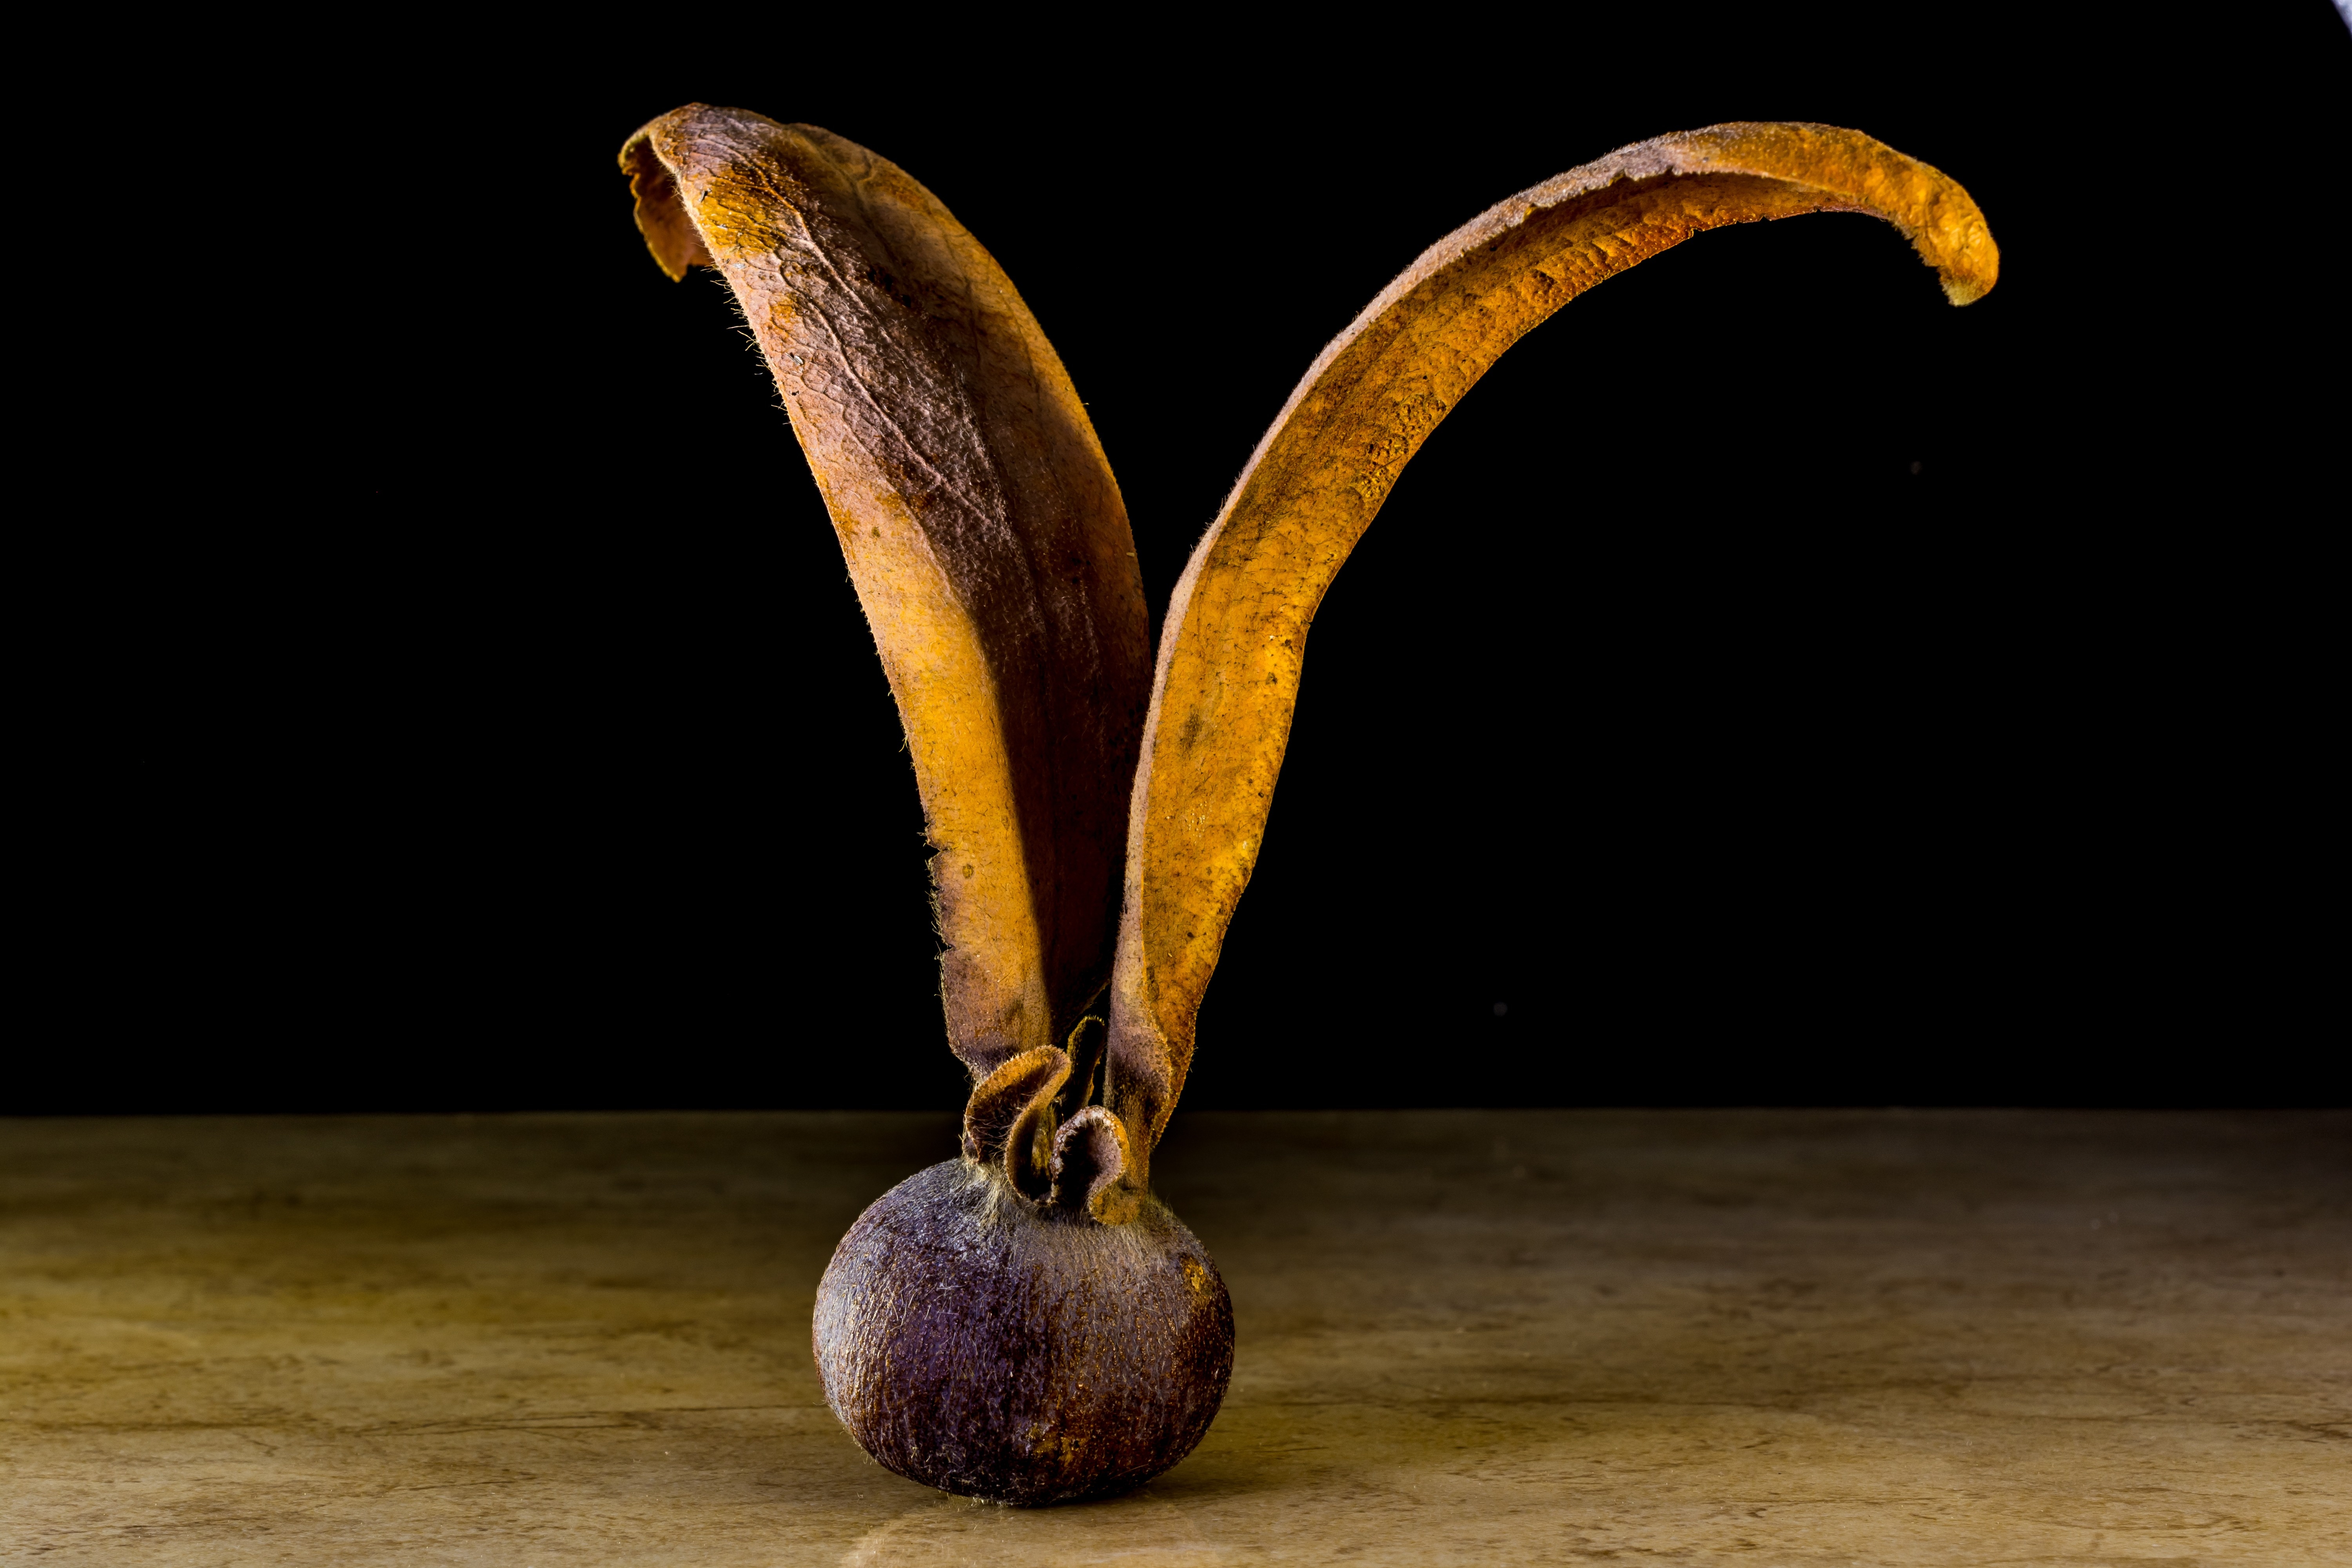 brown and purple round fruit